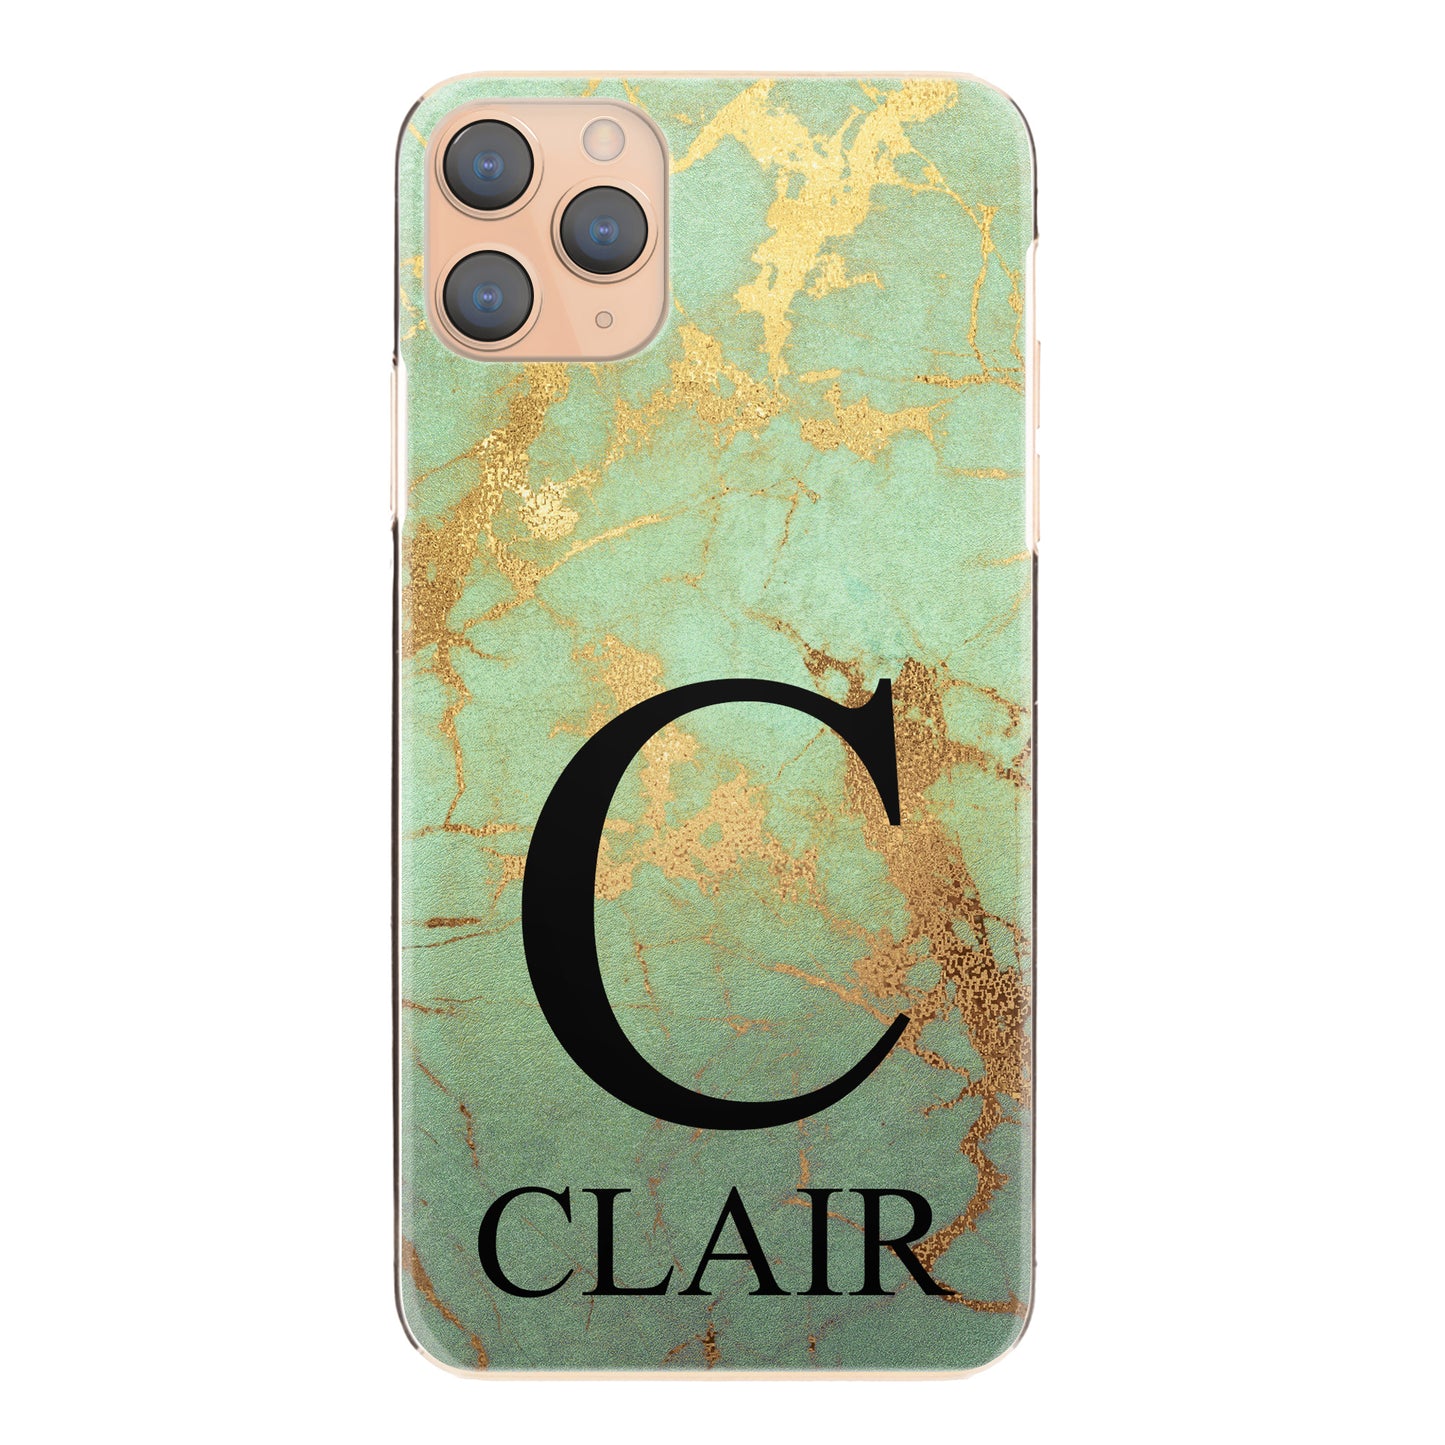 Personalised Samsung Galaxy Phone Hard Case with Monogram and Text on Gold Infused Green Marble